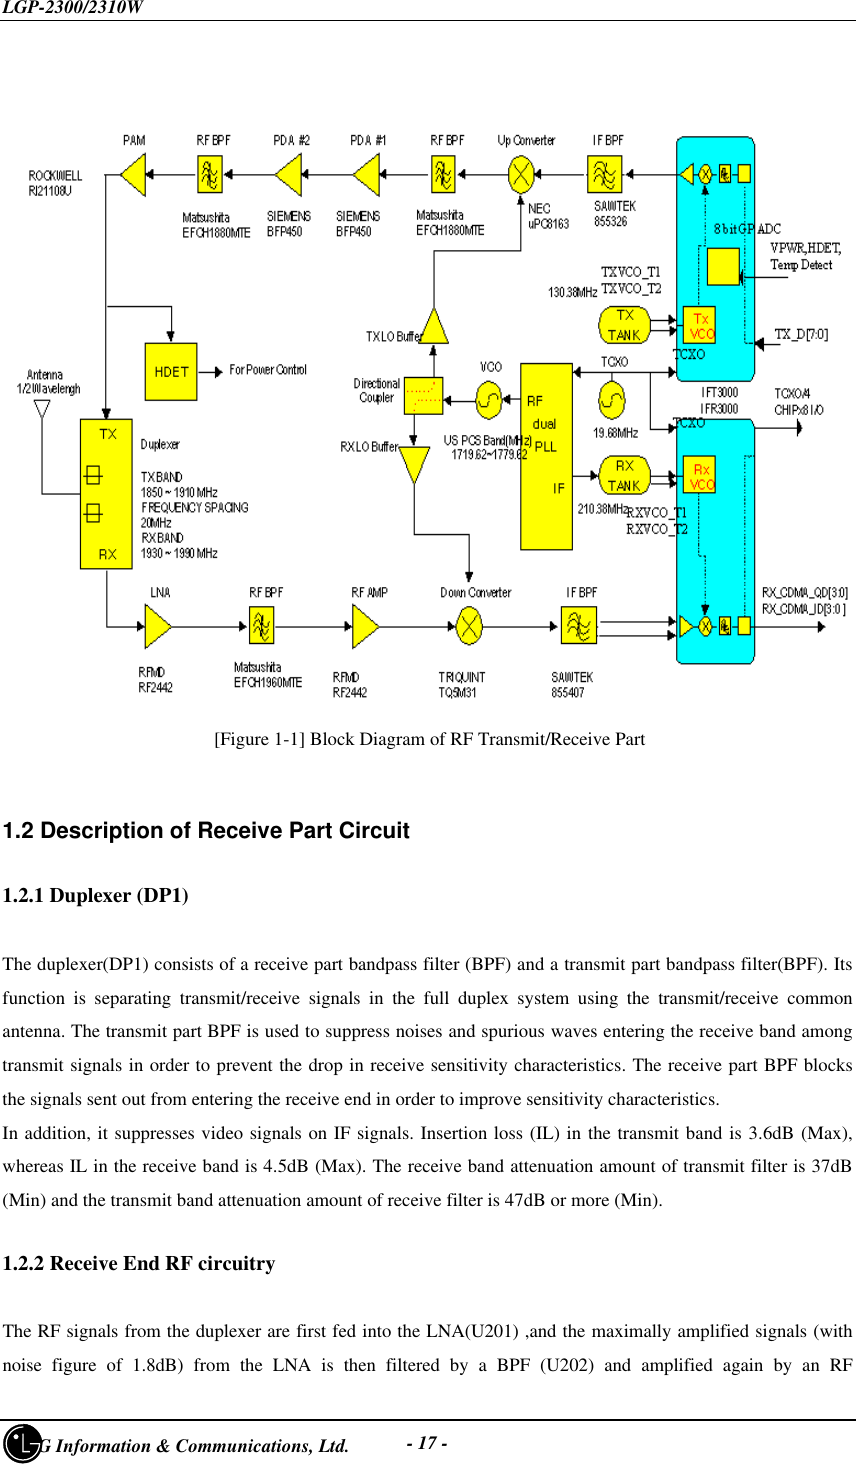 LGP-2300/2310W     LG Information &amp; Communications, Ltd. - 17 - [Figure 1-1] Block Diagram of RF Transmit/Receive Part1.2 Description of Receive Part Circuit1.2.1 Duplexer (DP1)The duplexer(DP1) consists of a receive part bandpass filter (BPF) and a transmit part bandpass filter(BPF). Itsfunction is separating transmit/receive signals in the full duplex system using the transmit/receive commonantenna. The transmit part BPF is used to suppress noises and spurious waves entering the receive band amongtransmit signals in order to prevent the drop in receive sensitivity characteristics. The receive part BPF blocksthe signals sent out from entering the receive end in order to improve sensitivity characteristics.In addition, it suppresses video signals on IF signals. Insertion loss (IL) in the transmit band is 3.6dB (Max),whereas IL in the receive band is 4.5dB (Max). The receive band attenuation amount of transmit filter is 37dB(Min) and the transmit band attenuation amount of receive filter is 47dB or more (Min).1.2.2 Receive End RF circuitryThe RF signals from the duplexer are first fed into the LNA(U201) ,and the maximally amplified signals (withnoise figure of 1.8dB) from the LNA is then filtered by a BPF (U202) and amplified again by an RF